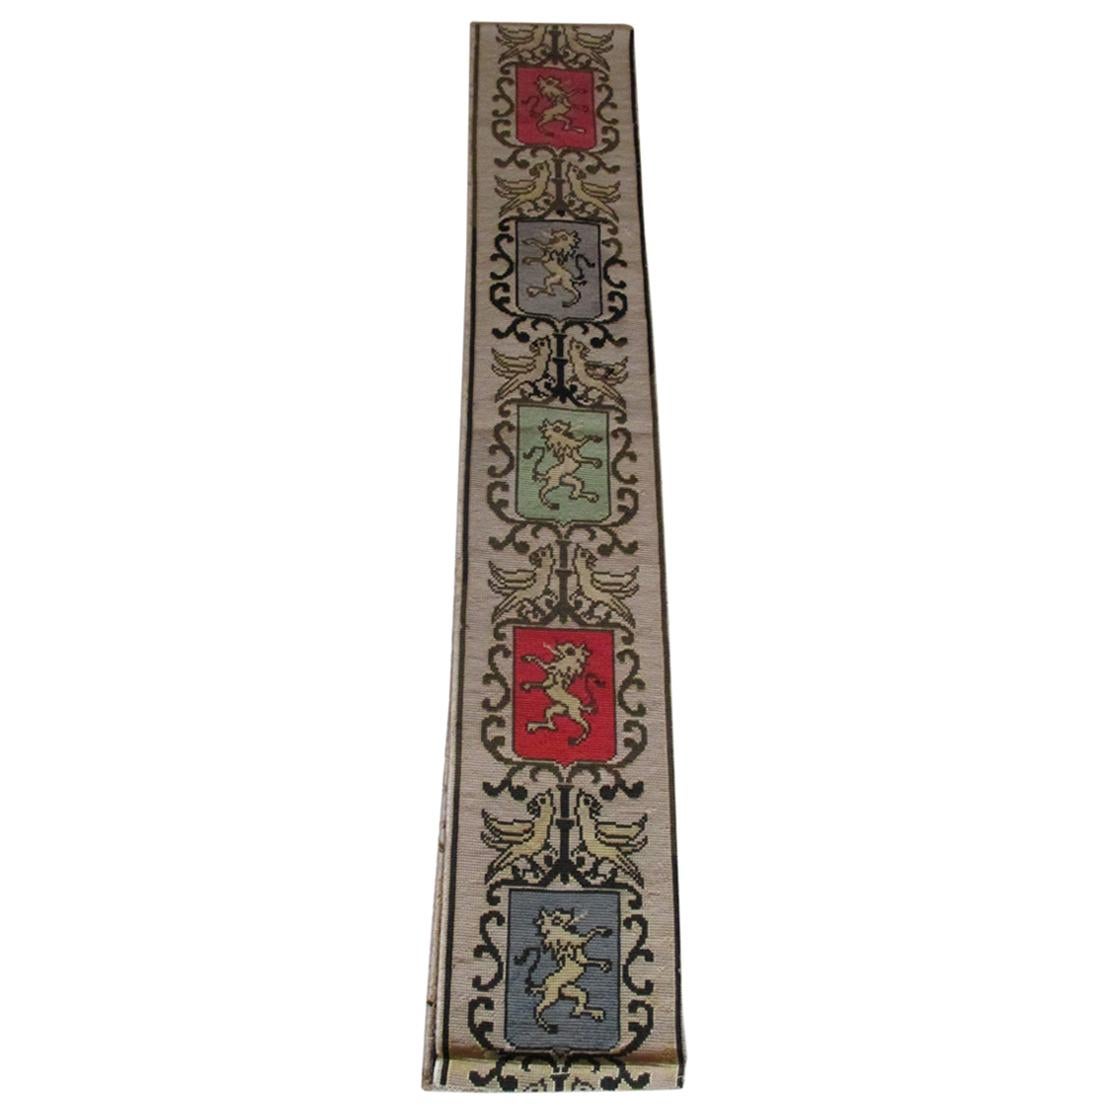 Antique Heraldic Needlepoint Tapestry Border For Sale